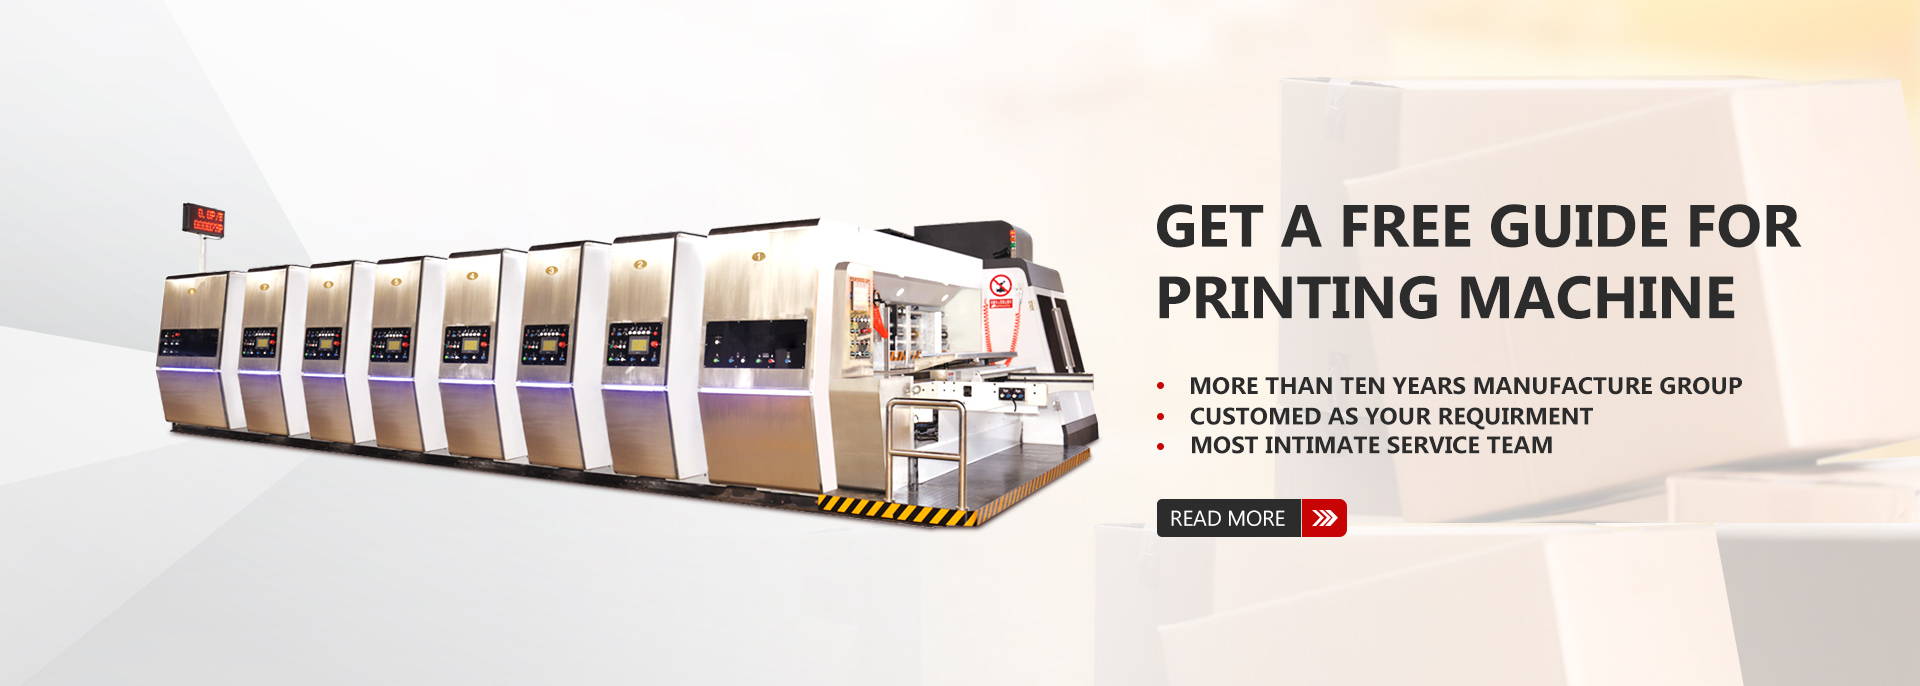 Get a free guide for printing machine